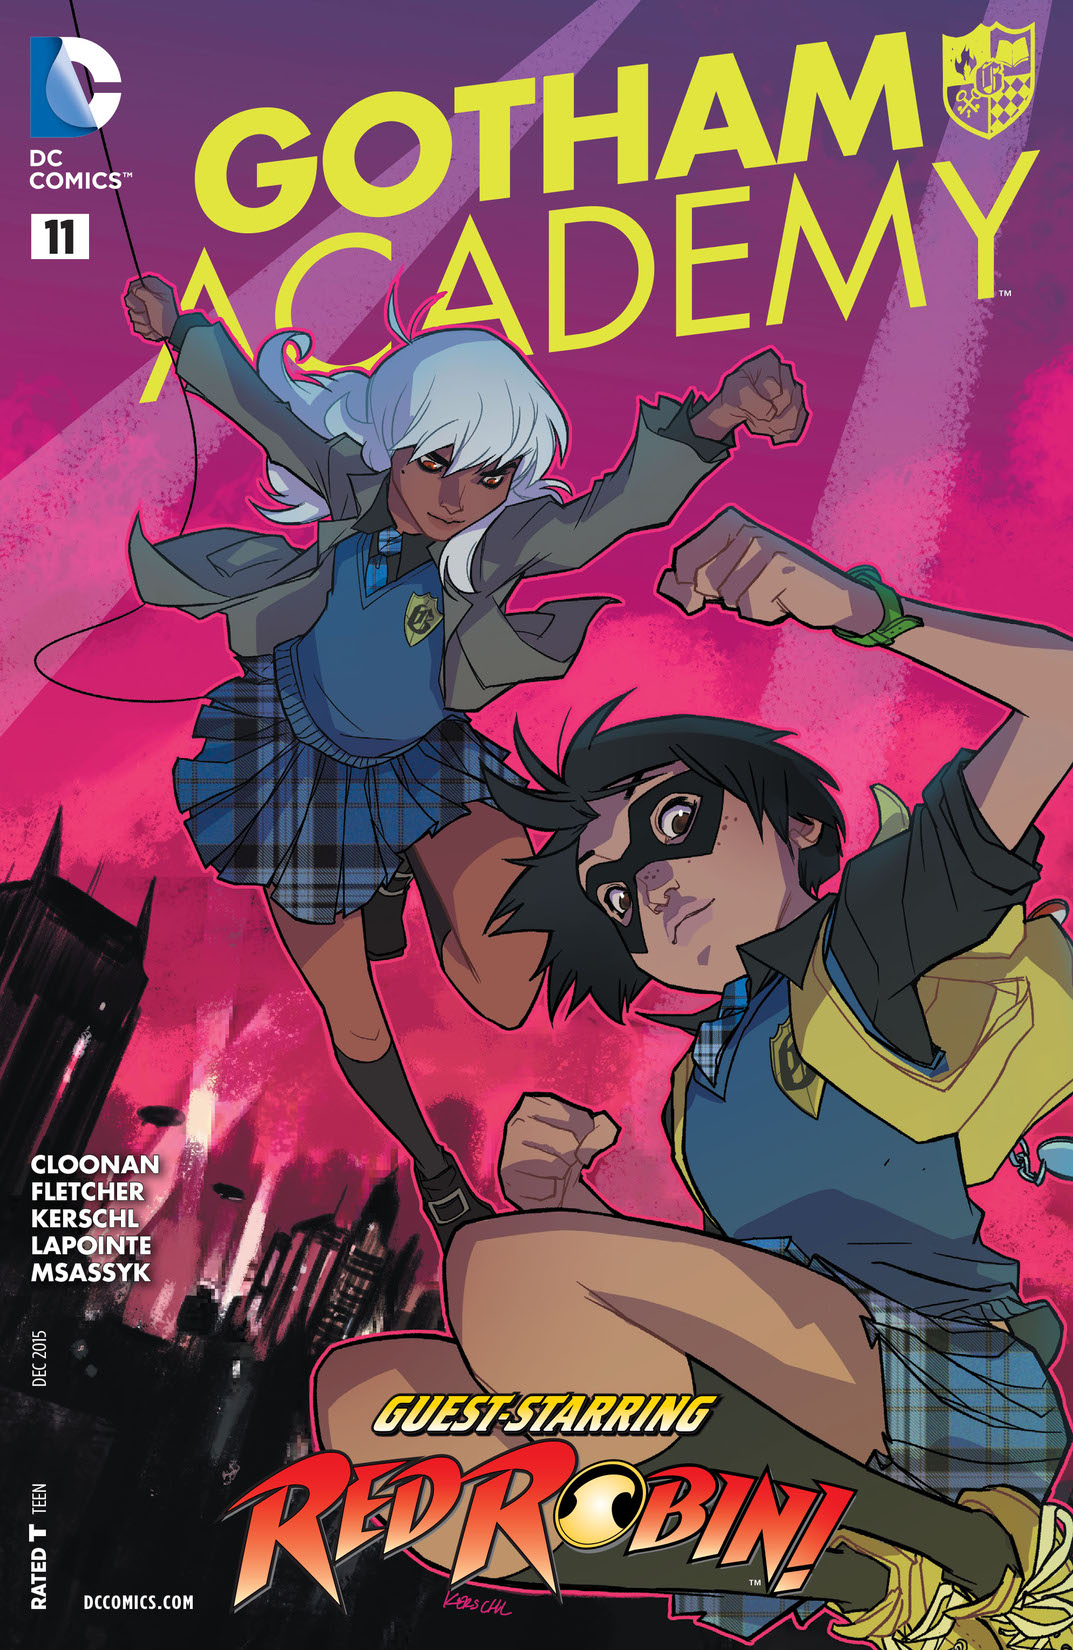 Gotham Academy #11 preview images